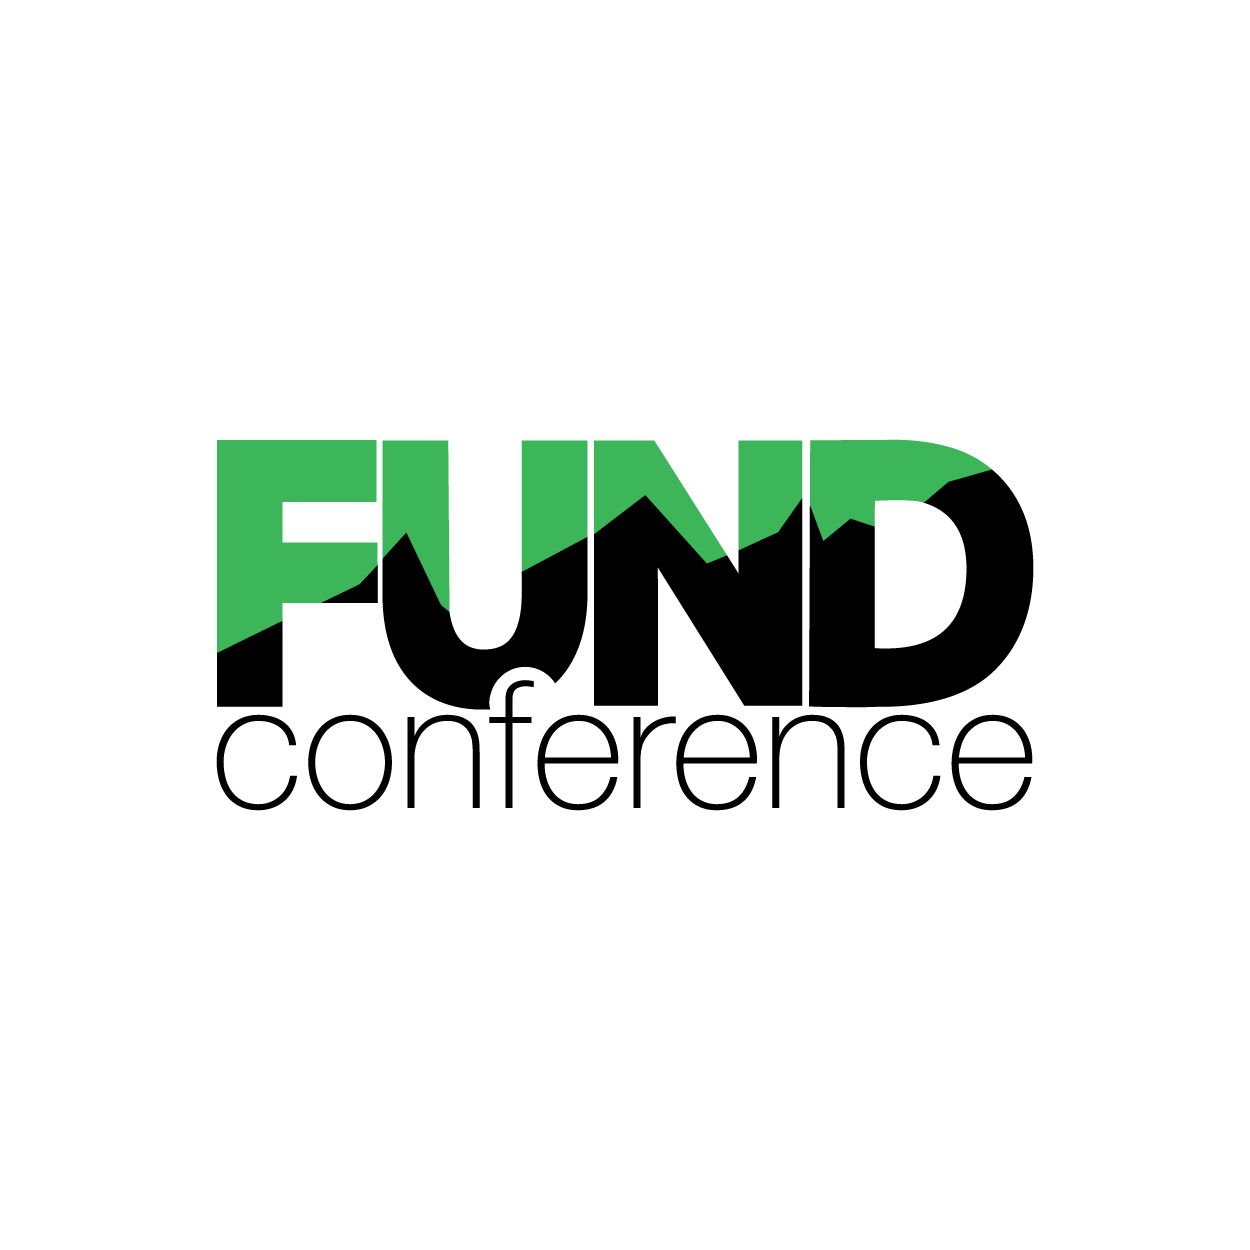 FUND Conference